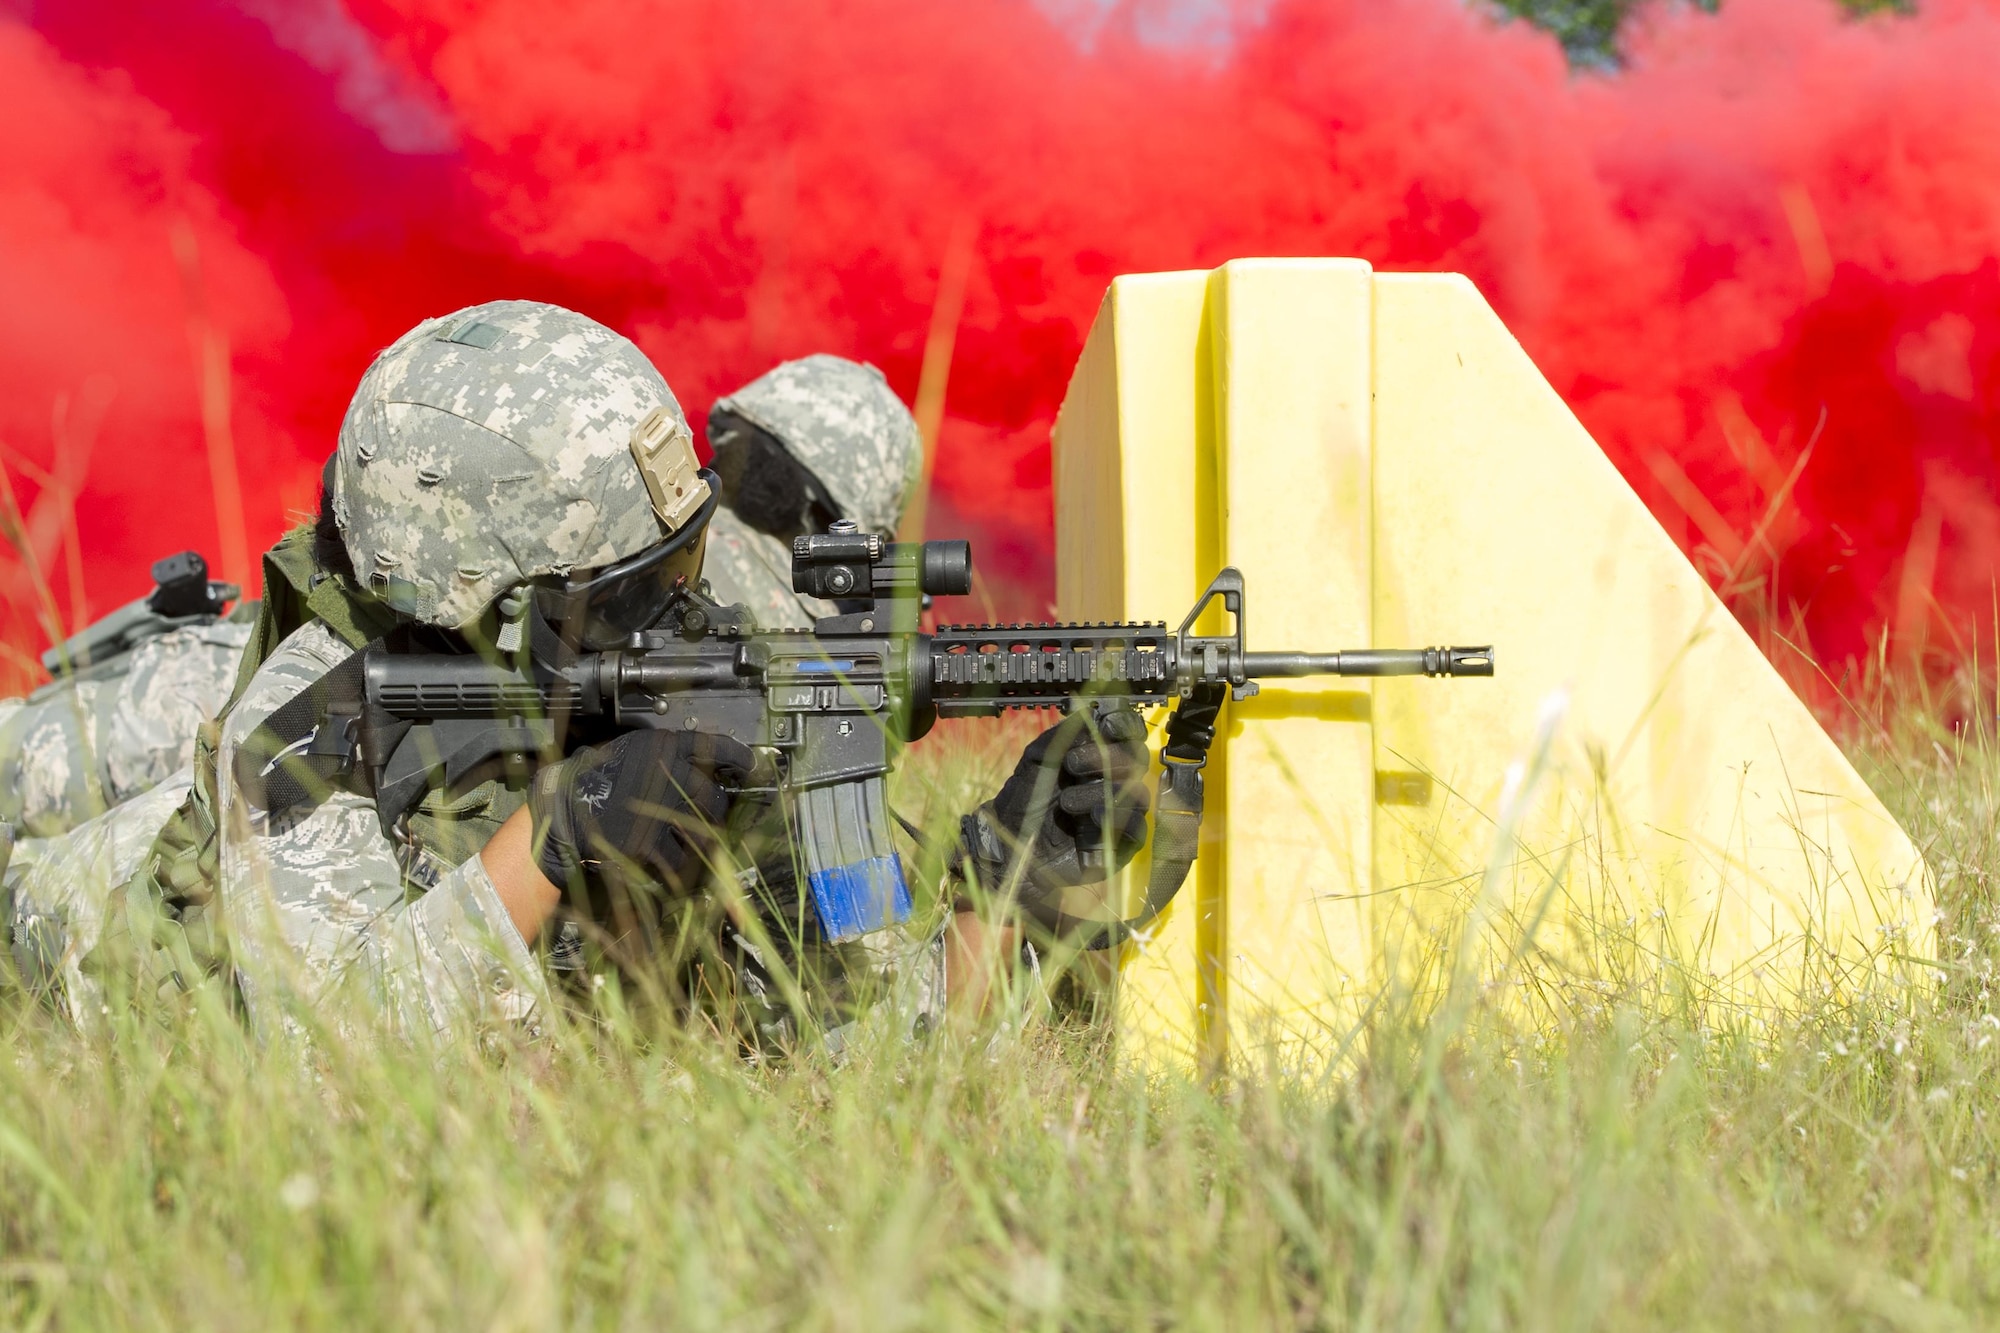 Reserve Citizen Airmen from the 482nd Security Force Squadron, Homestead Air Reserve Base, Florida, take cover and return fire while participating in a shoot, move, and communicate training with sim-munitions on September 26, 2017.  This annual training for security forces members helps keep the airmen proficient in many situation they may encounter stateside or overseas. (U.S. Air Force photo by Staff Sgt. Kyle Brasier)